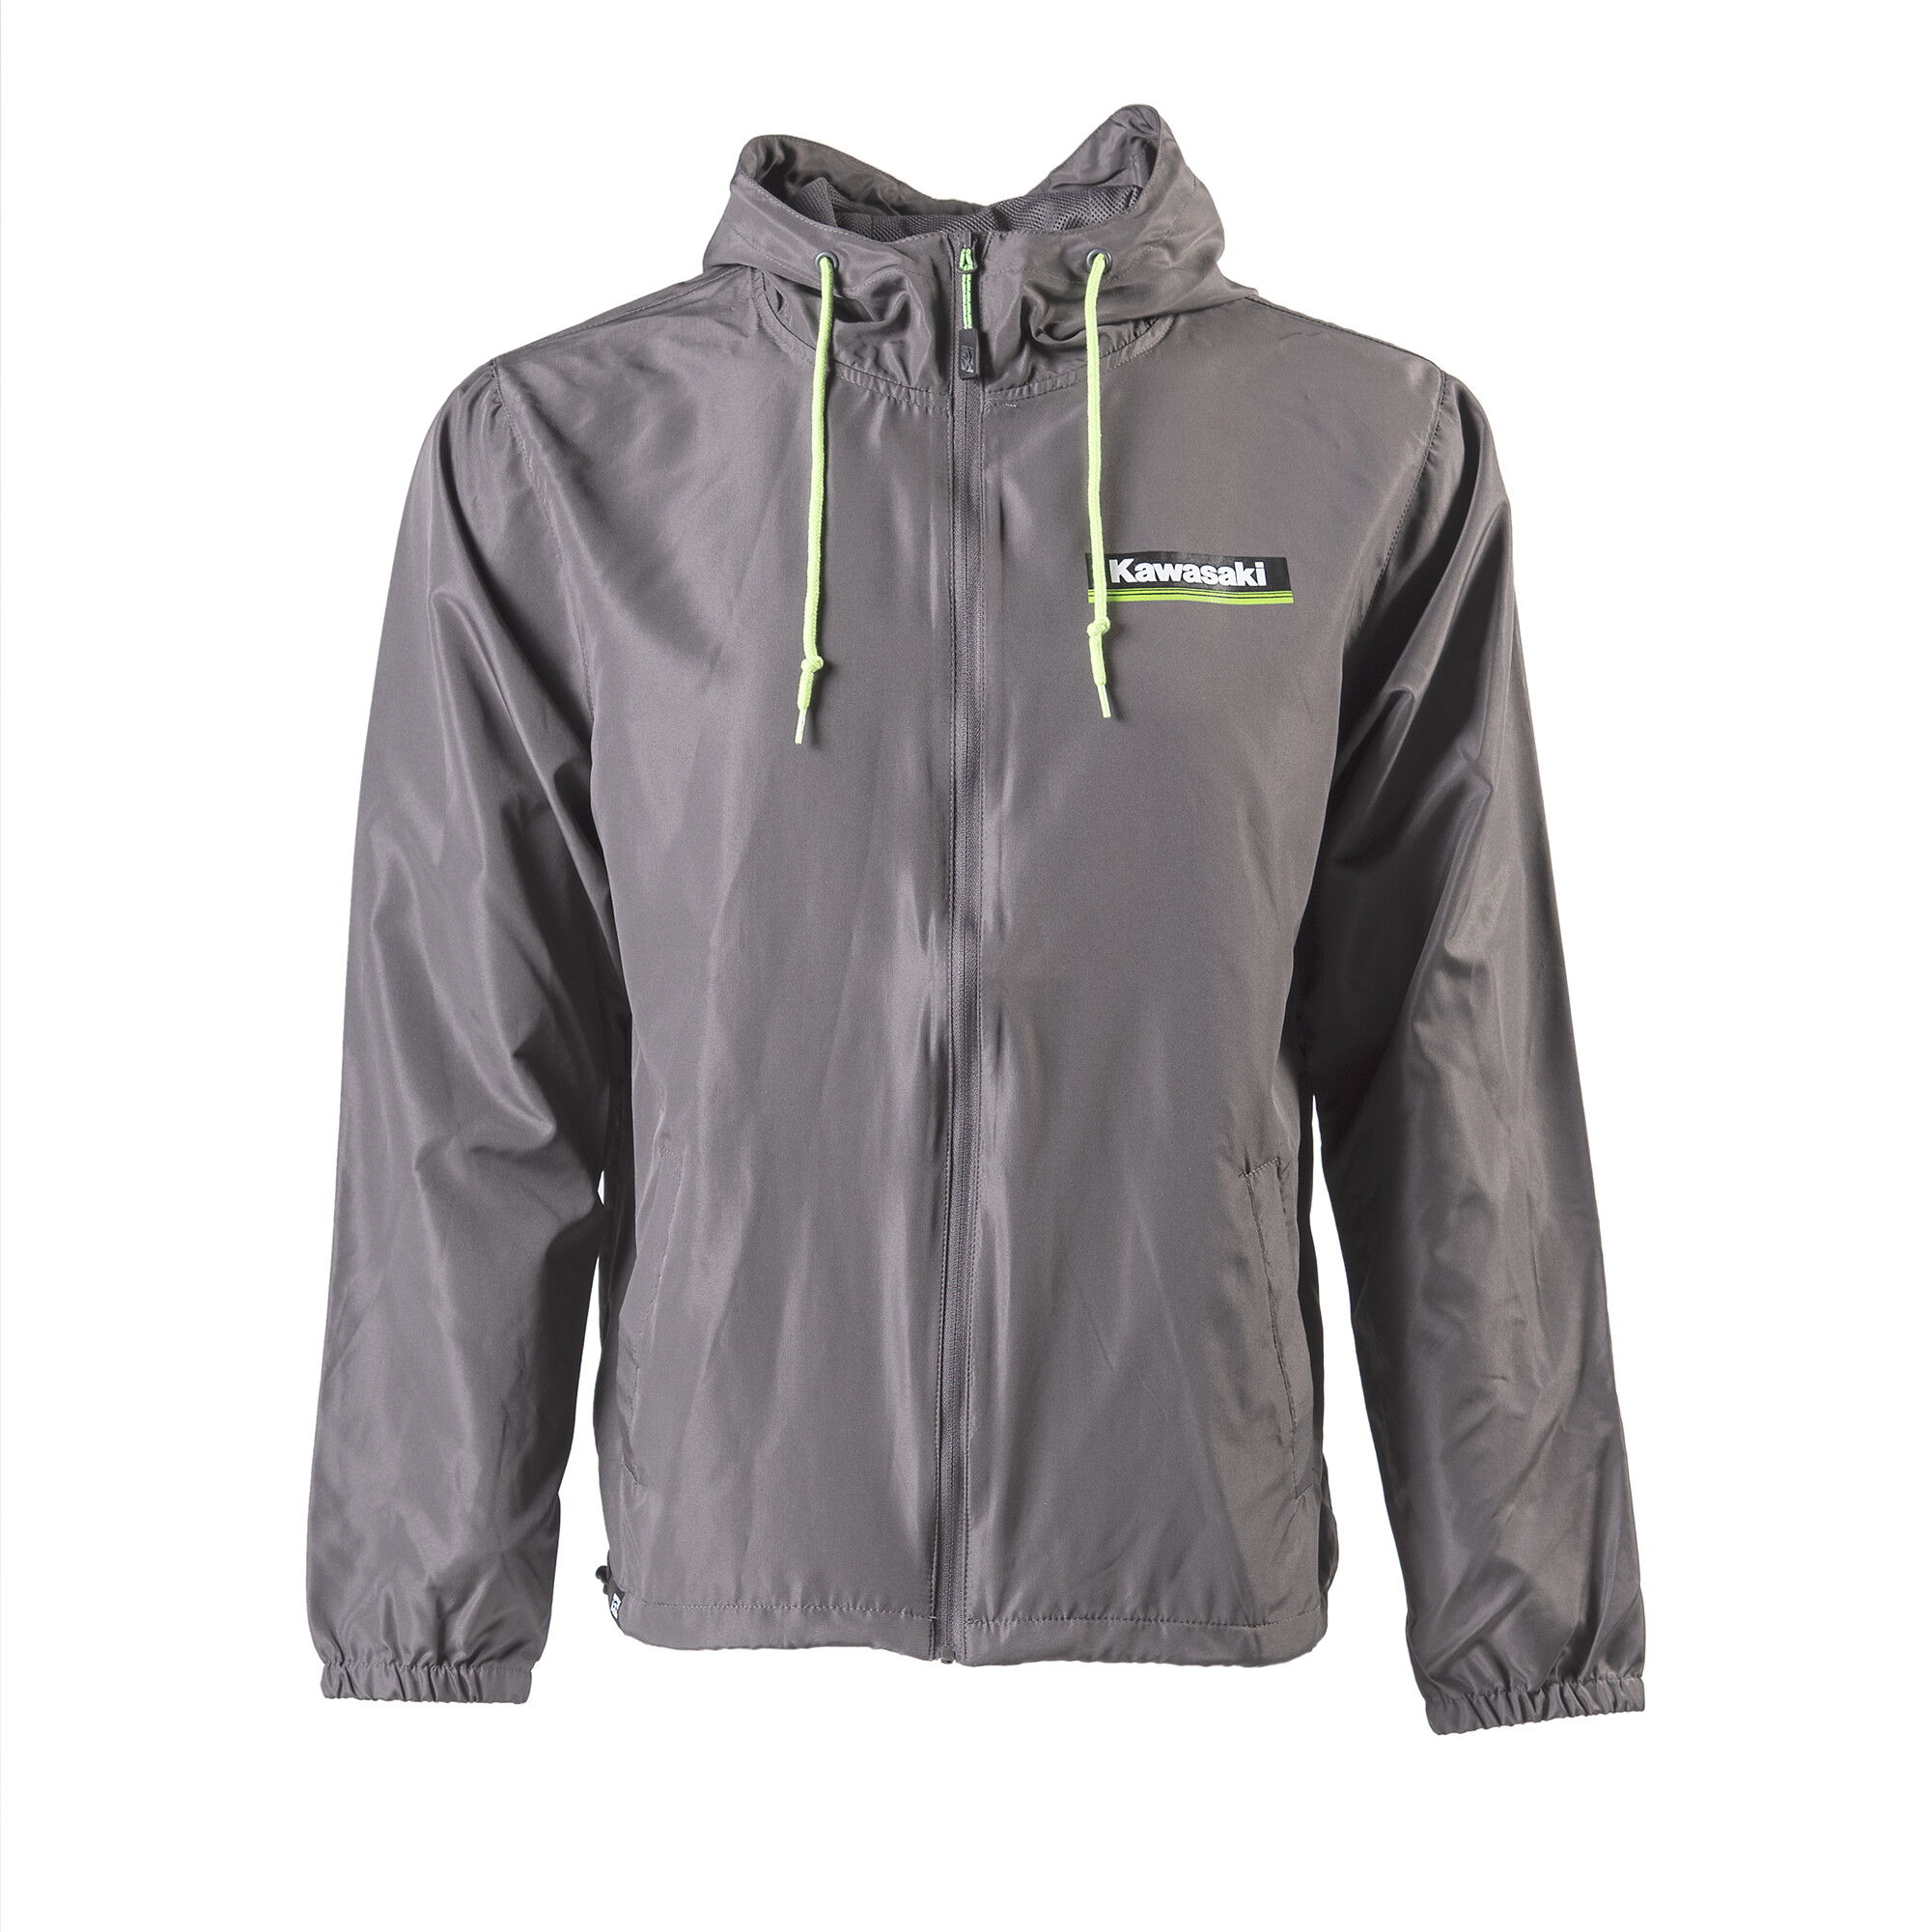 Sweepstakes Giveaway Win A Factory Effex Windbreaker and Umbrella - Racer X